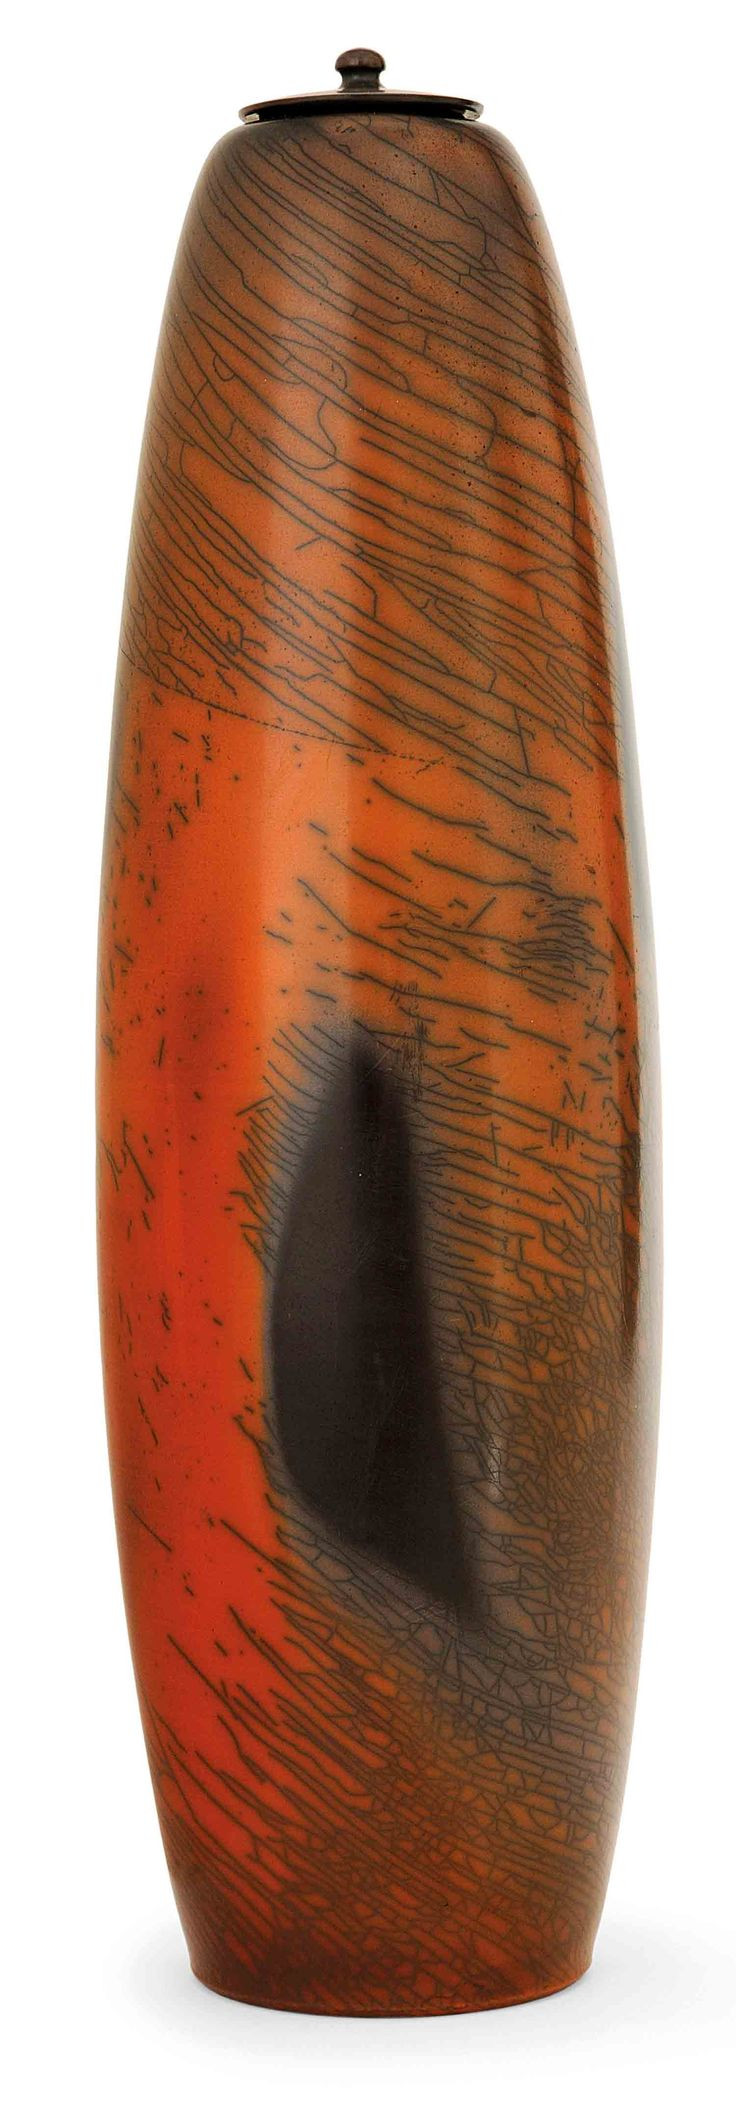 24 attractive Navajo Pottery Vases 2024 free download navajo pottery vases of 68 best vases images on pinterest pertaining to bayle pierre 1945 2004 large covered vase 1996 we love it